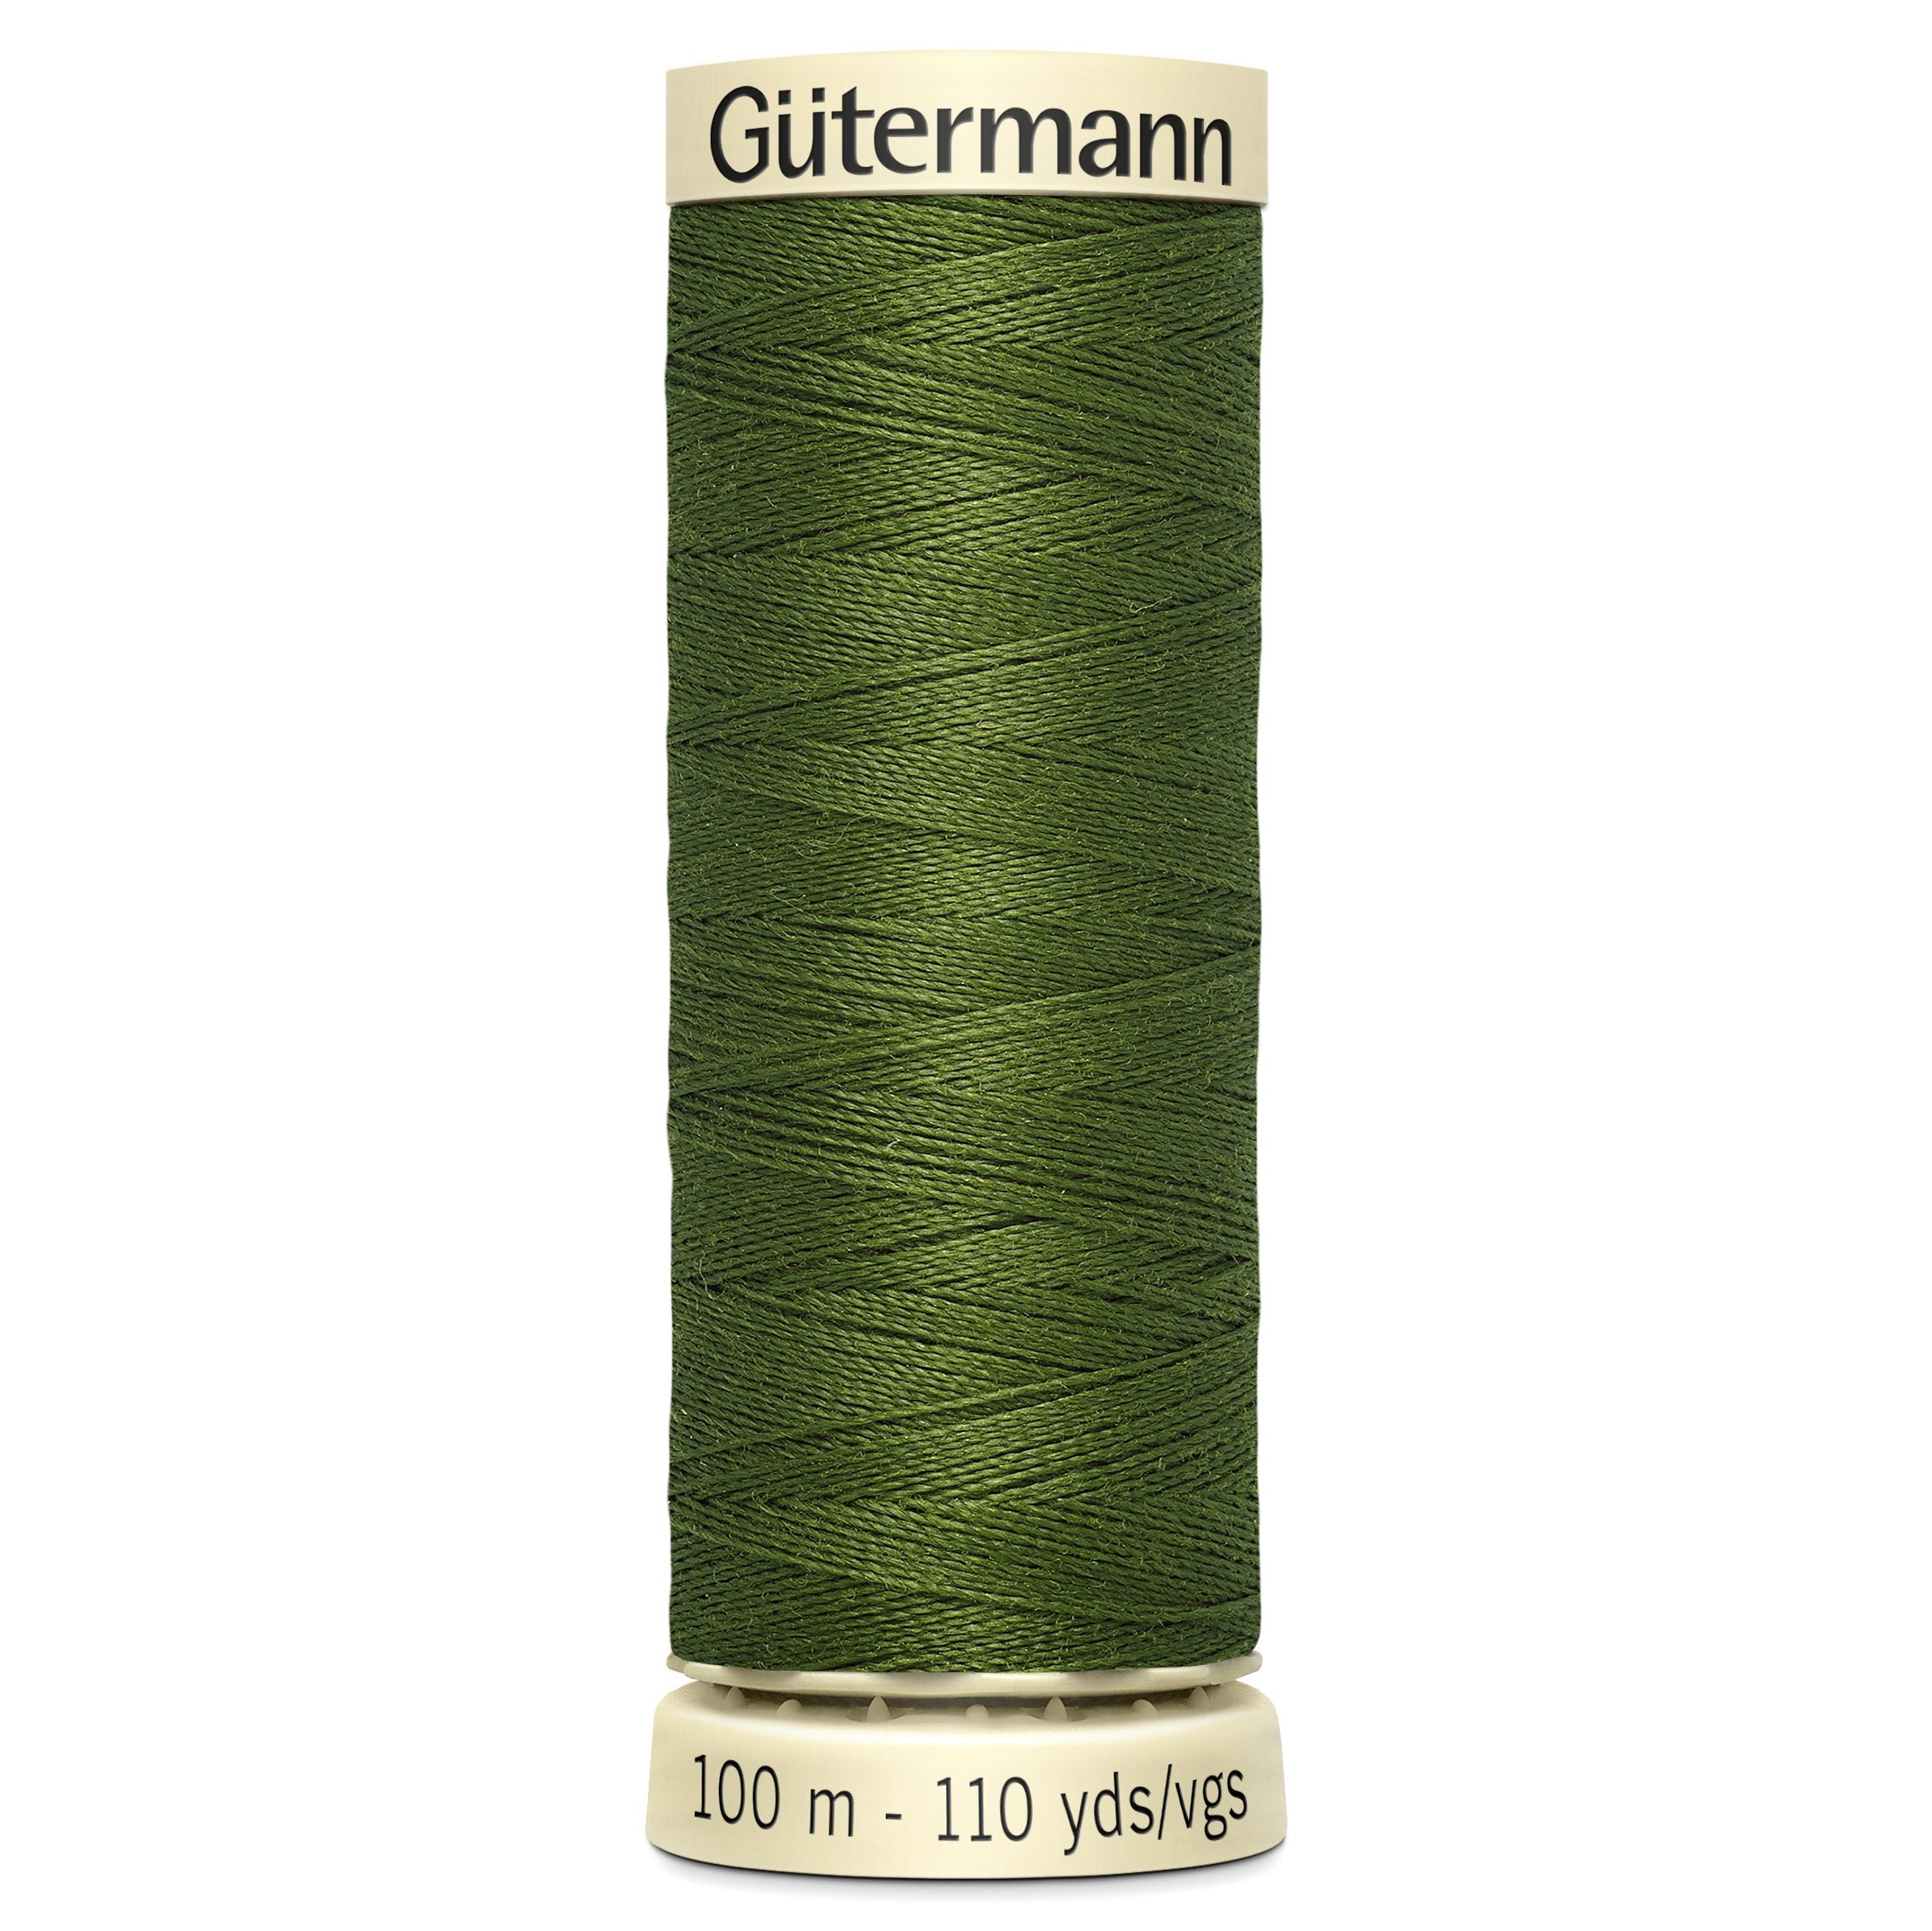 Gutermann Sew-All Sewing Thread | 585 Dark Green from Jaycotts Sewing Supplies